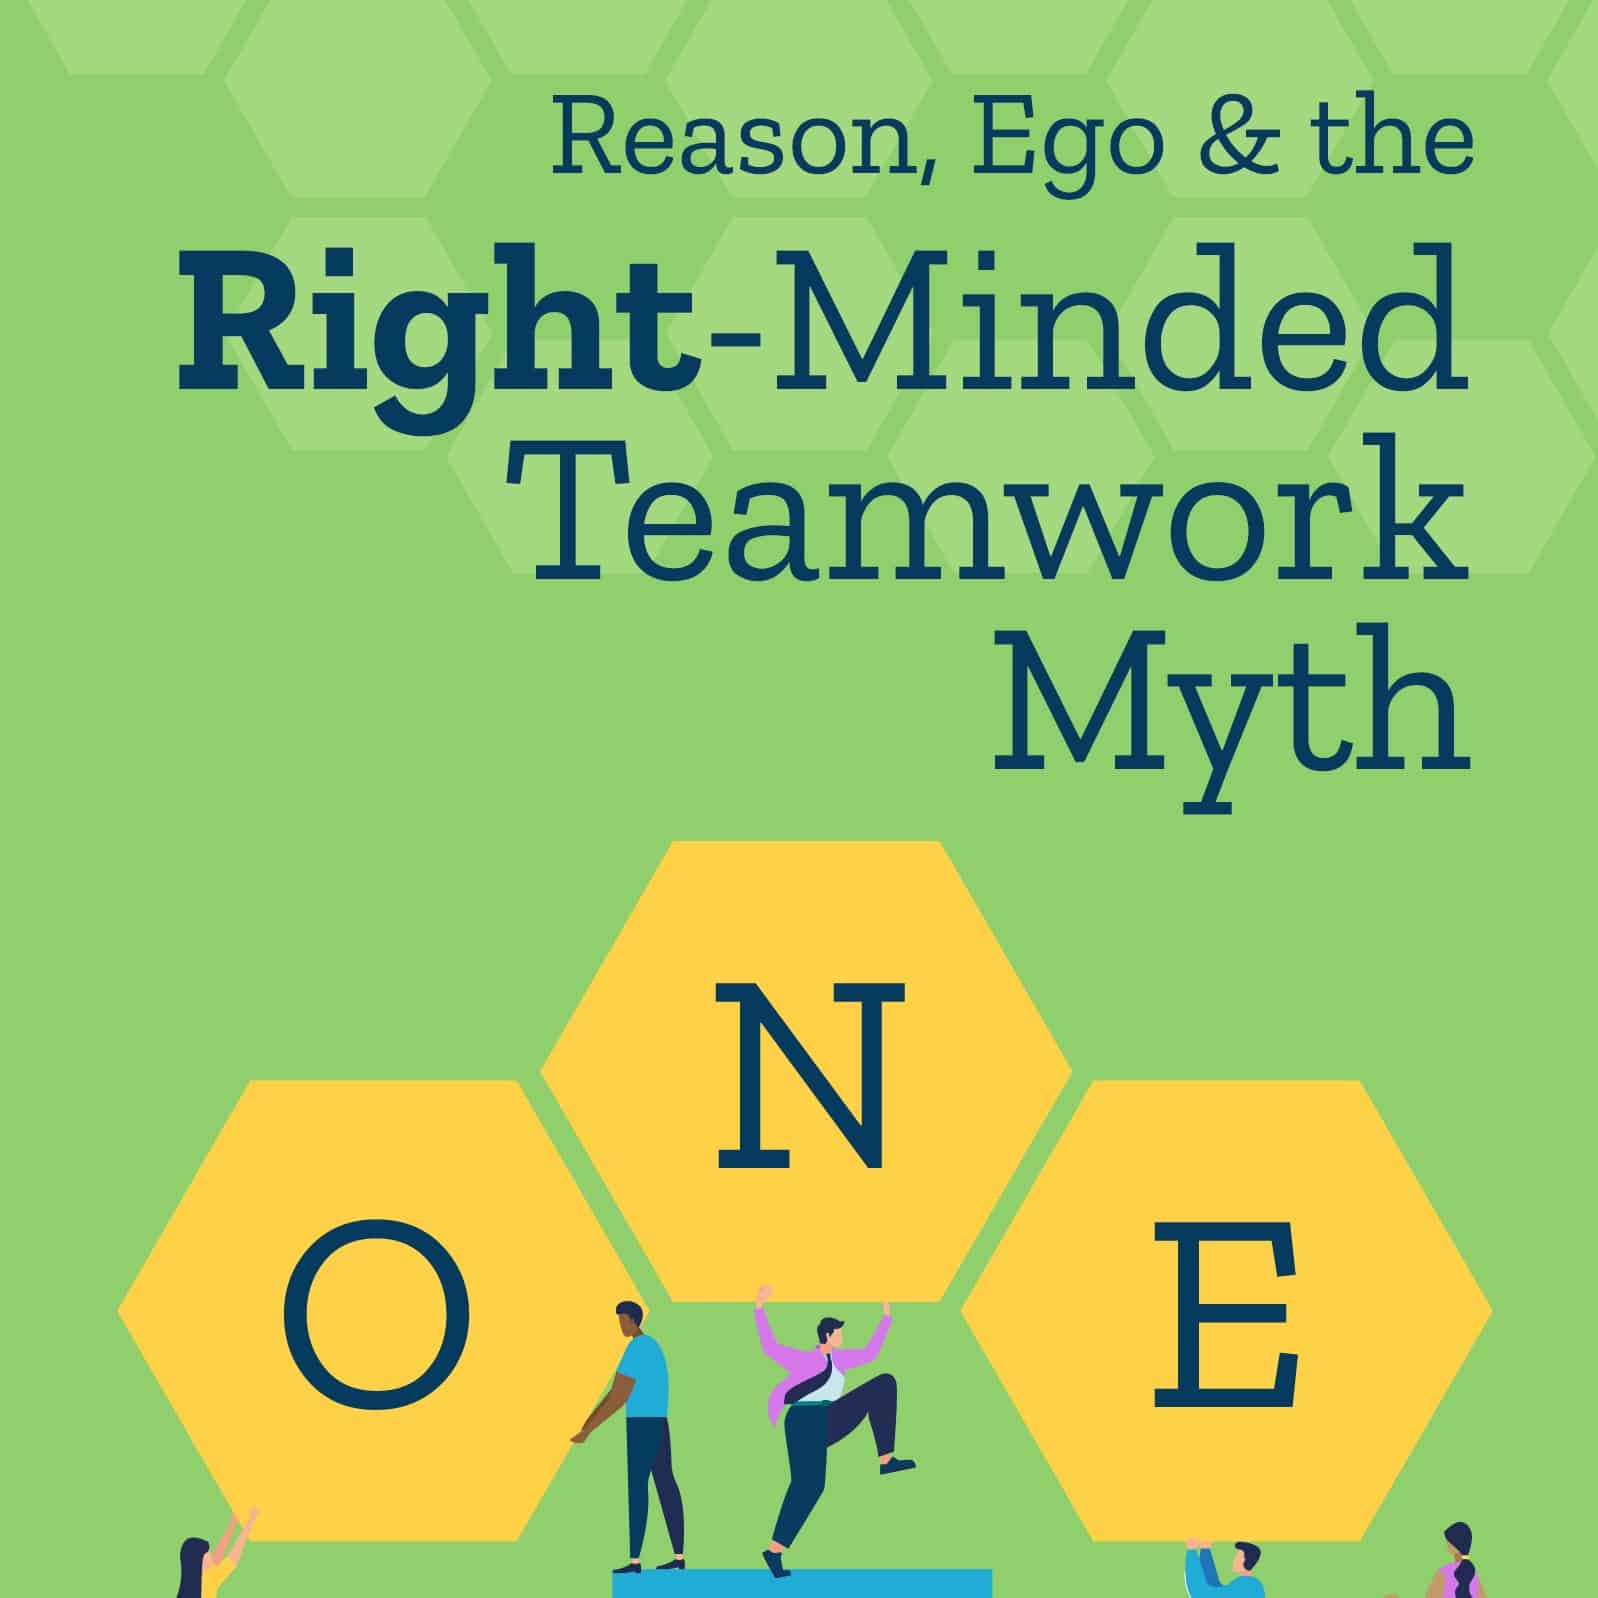 Reason-Ego-and-Right-Minded-Teamwork-Myth-Package